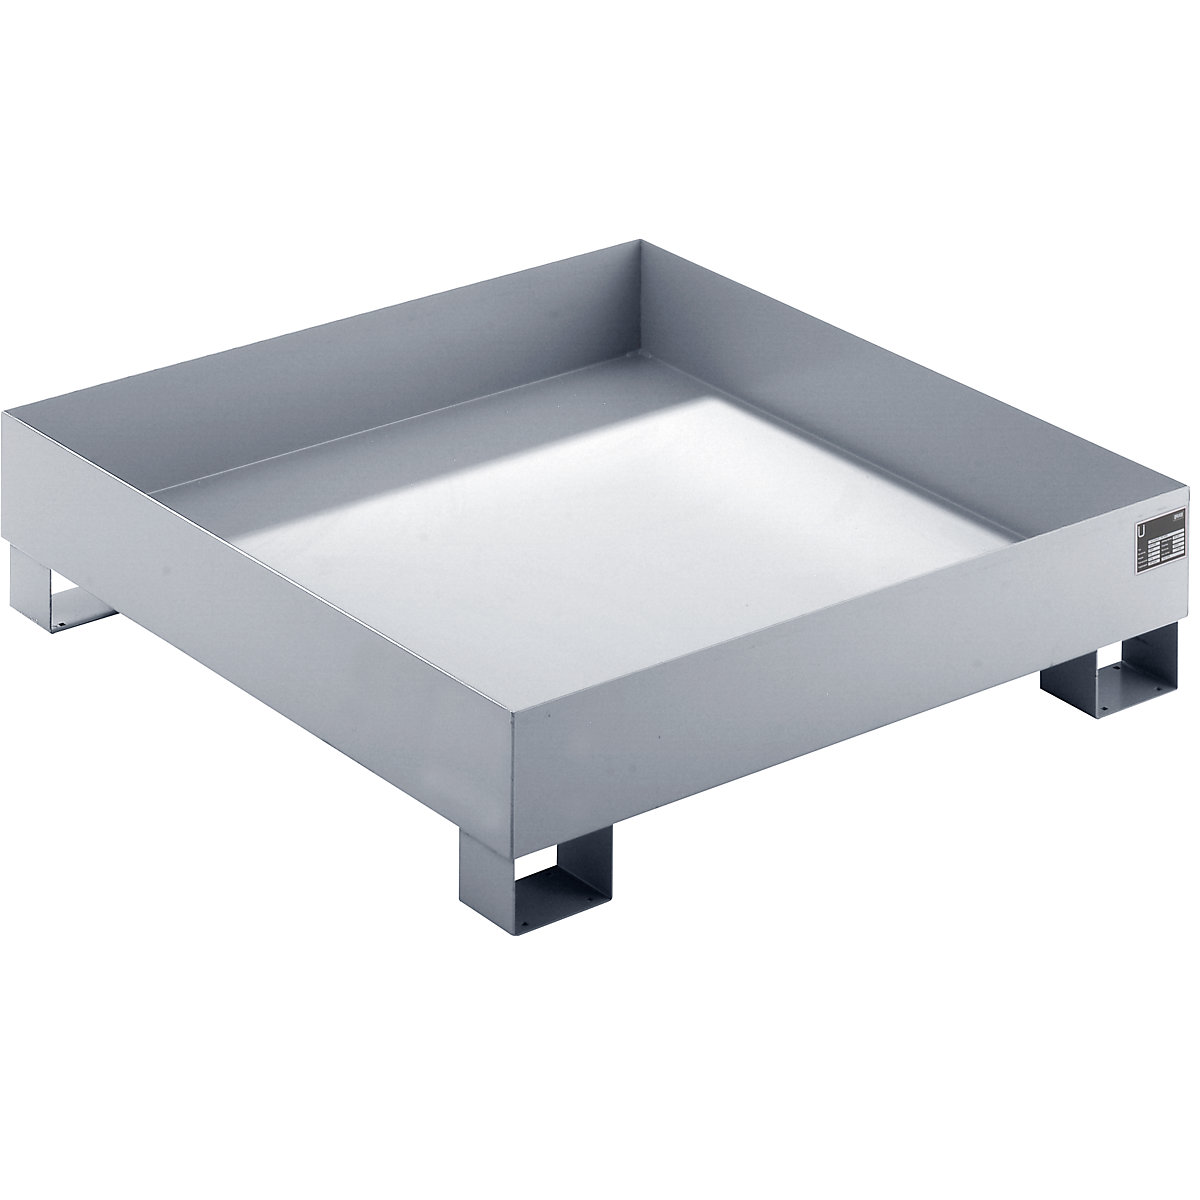 EUROKRAFTbasic – Sump tray made from sheet steel, LxWxH 1200 x 1200 x 285 mm, hot dip galvanised